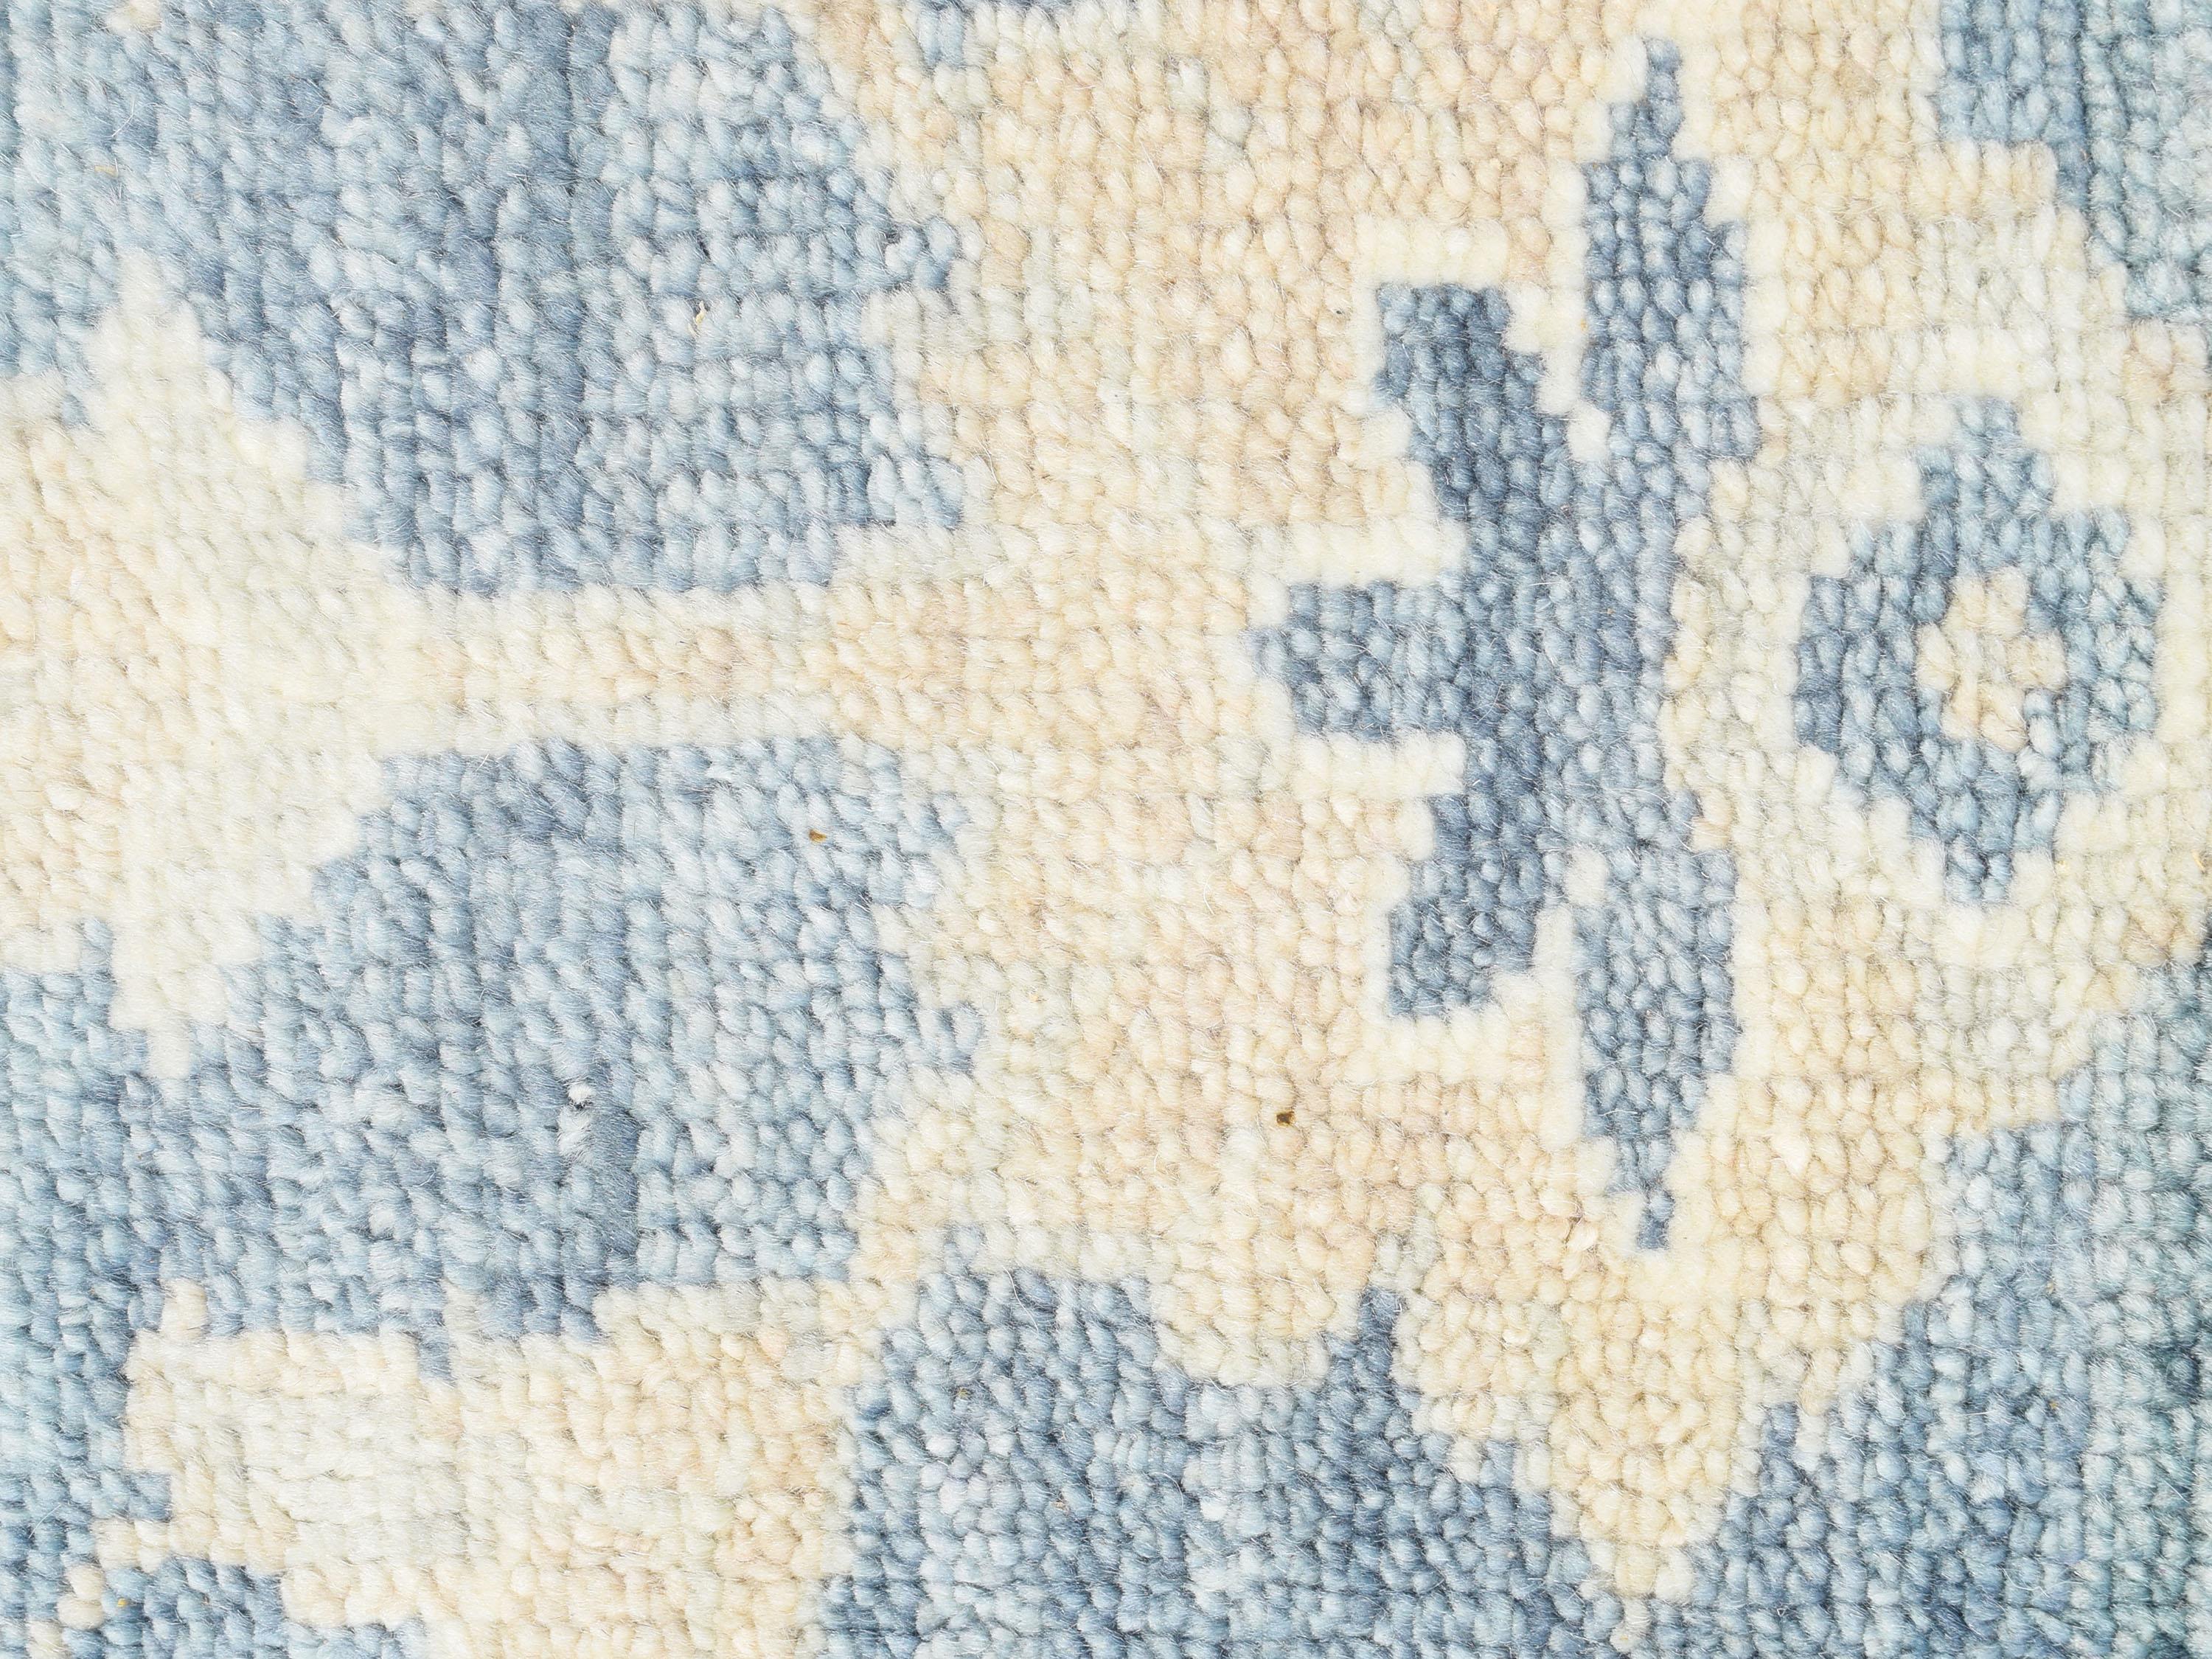 Indian Hand Woven Luxury Blue / Beige Area Rug For Sale